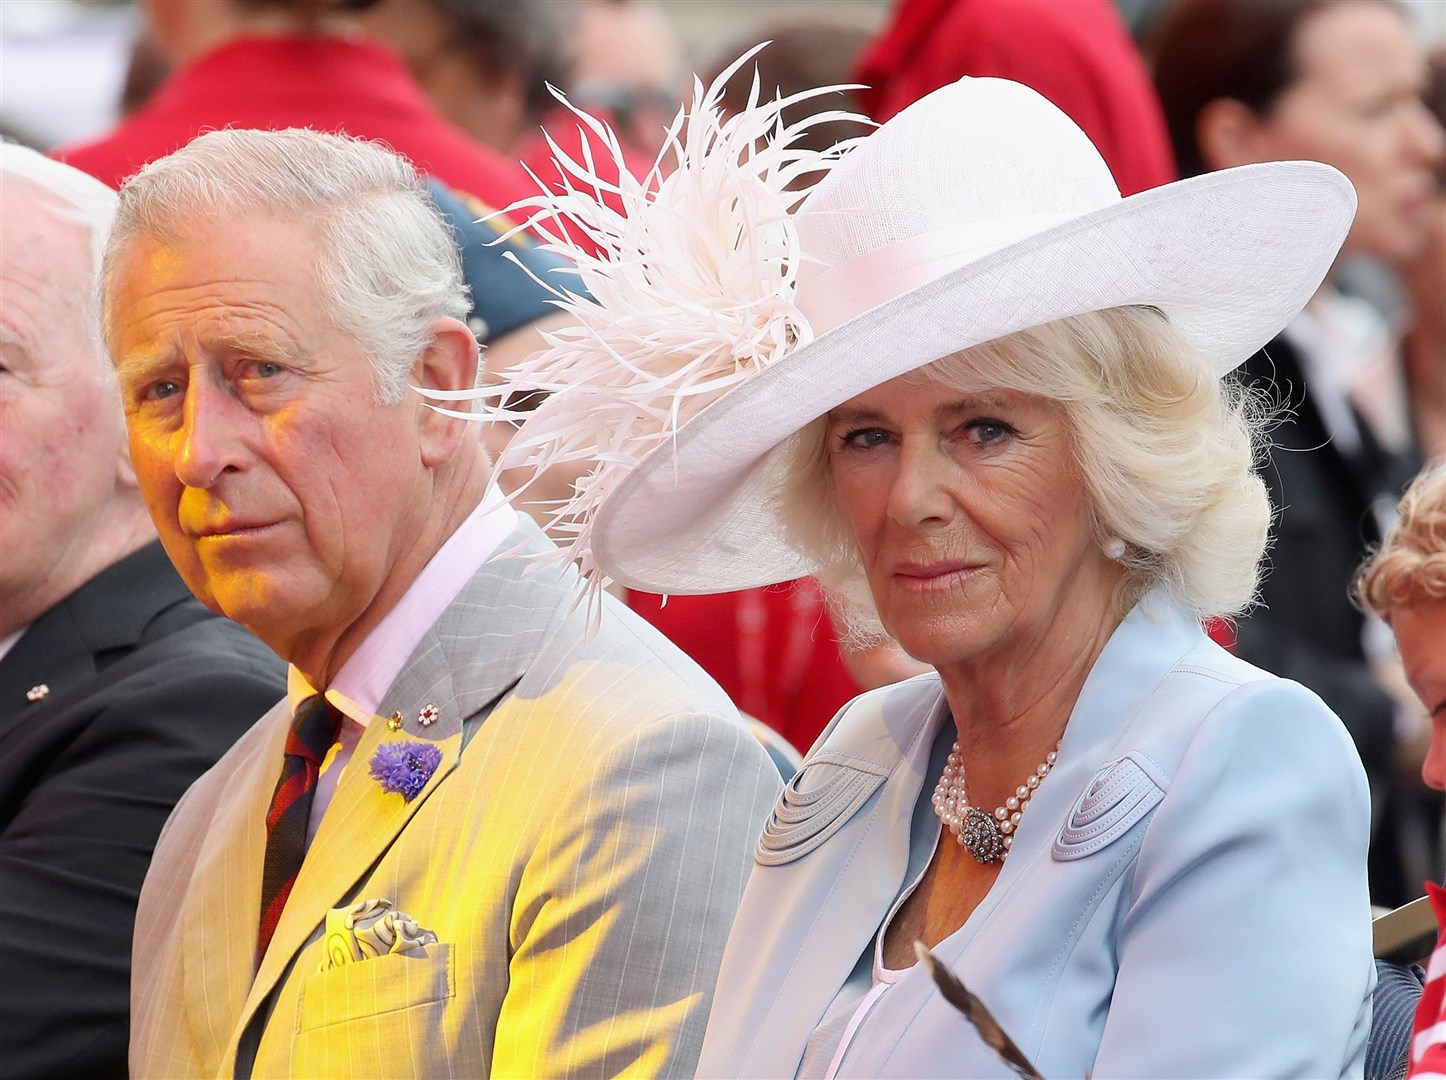 Charles and Camilla during a previous visit to Canada. Chris Jackson/PA